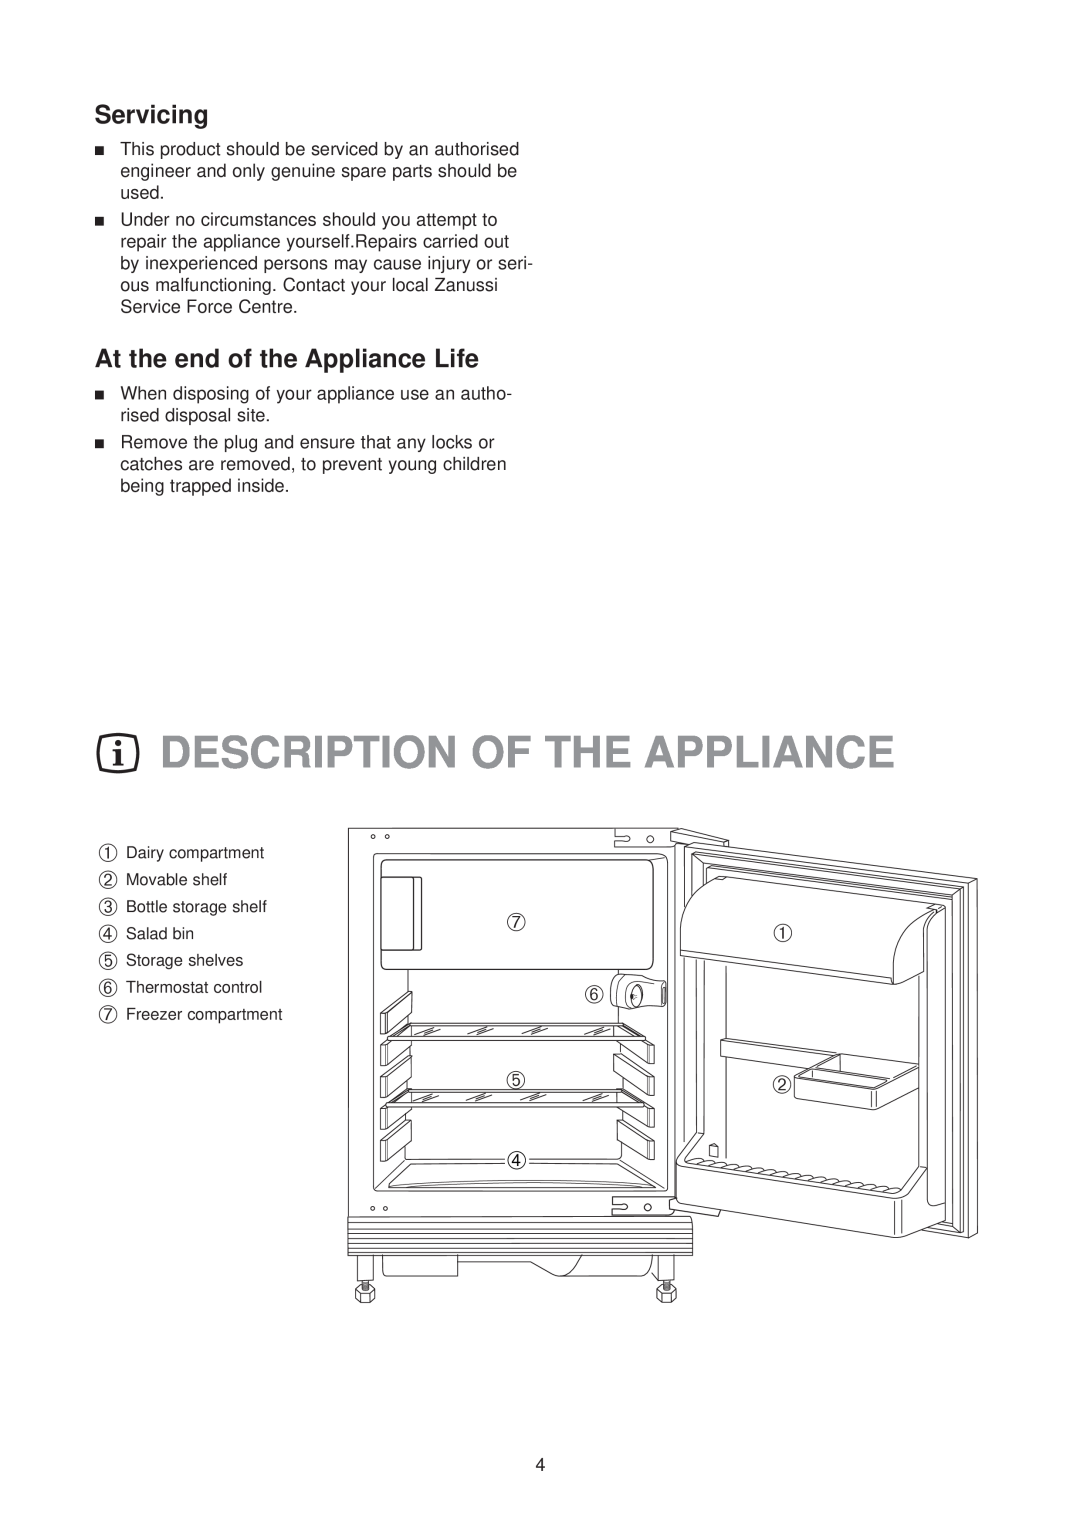 Zanussi ZU 9124 manual Description Of The Appliance, Servicing, At the end of the Appliance Life, ➆ ➅ ➄ ➃ 